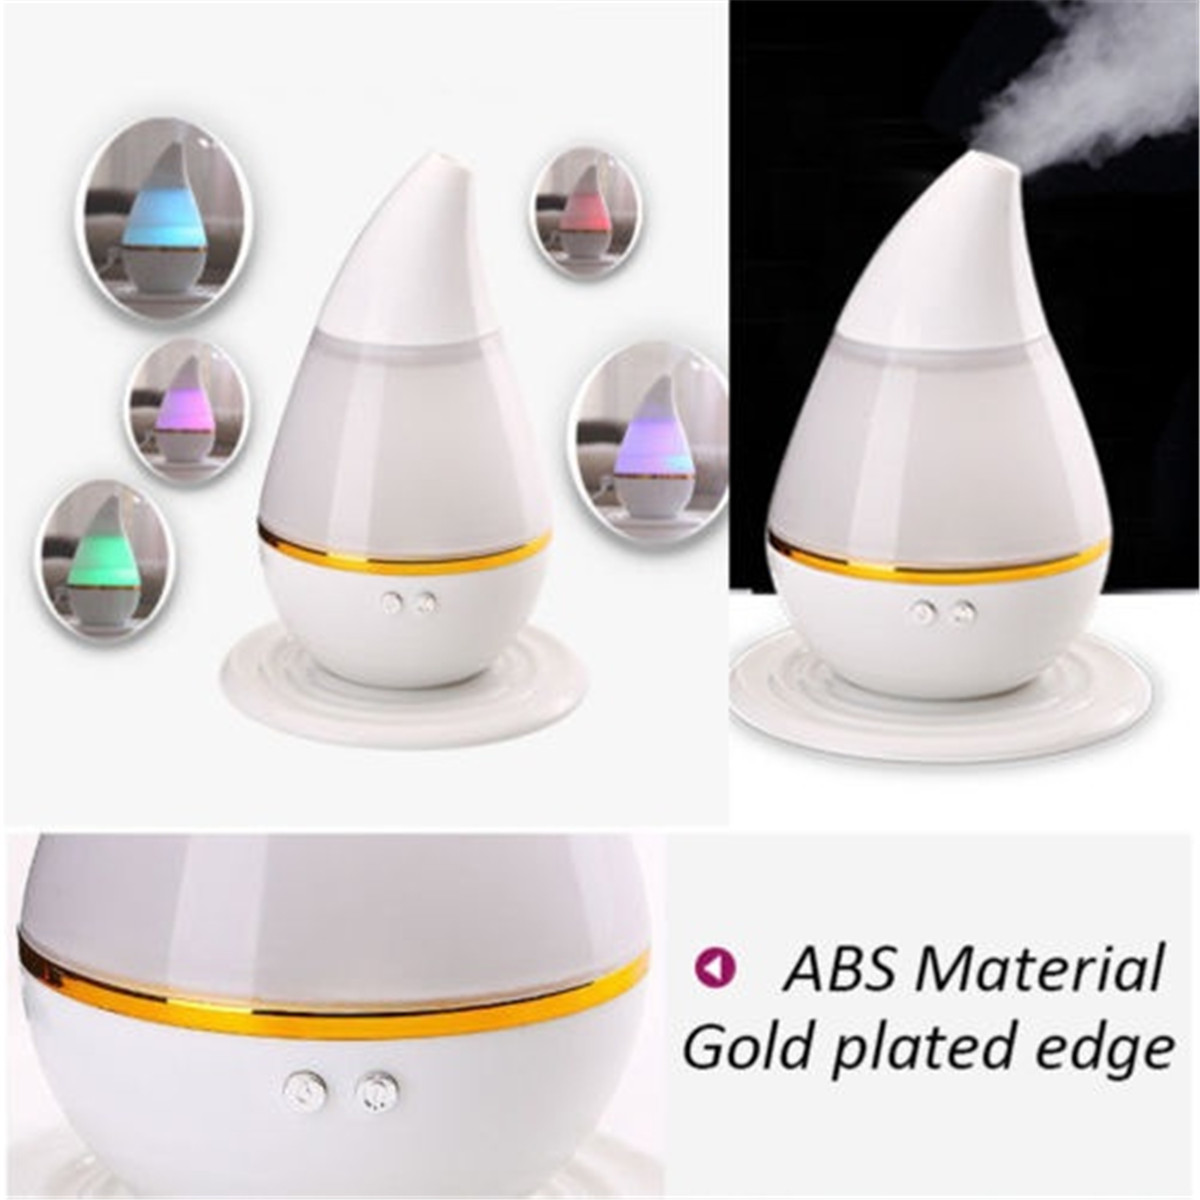 250ml-Ultrasonic-Air-Humidifier-USB-Charging-Essential-Oil-Diffuser-LED-Light-Purifier-for-Home-Offi-1787140-4